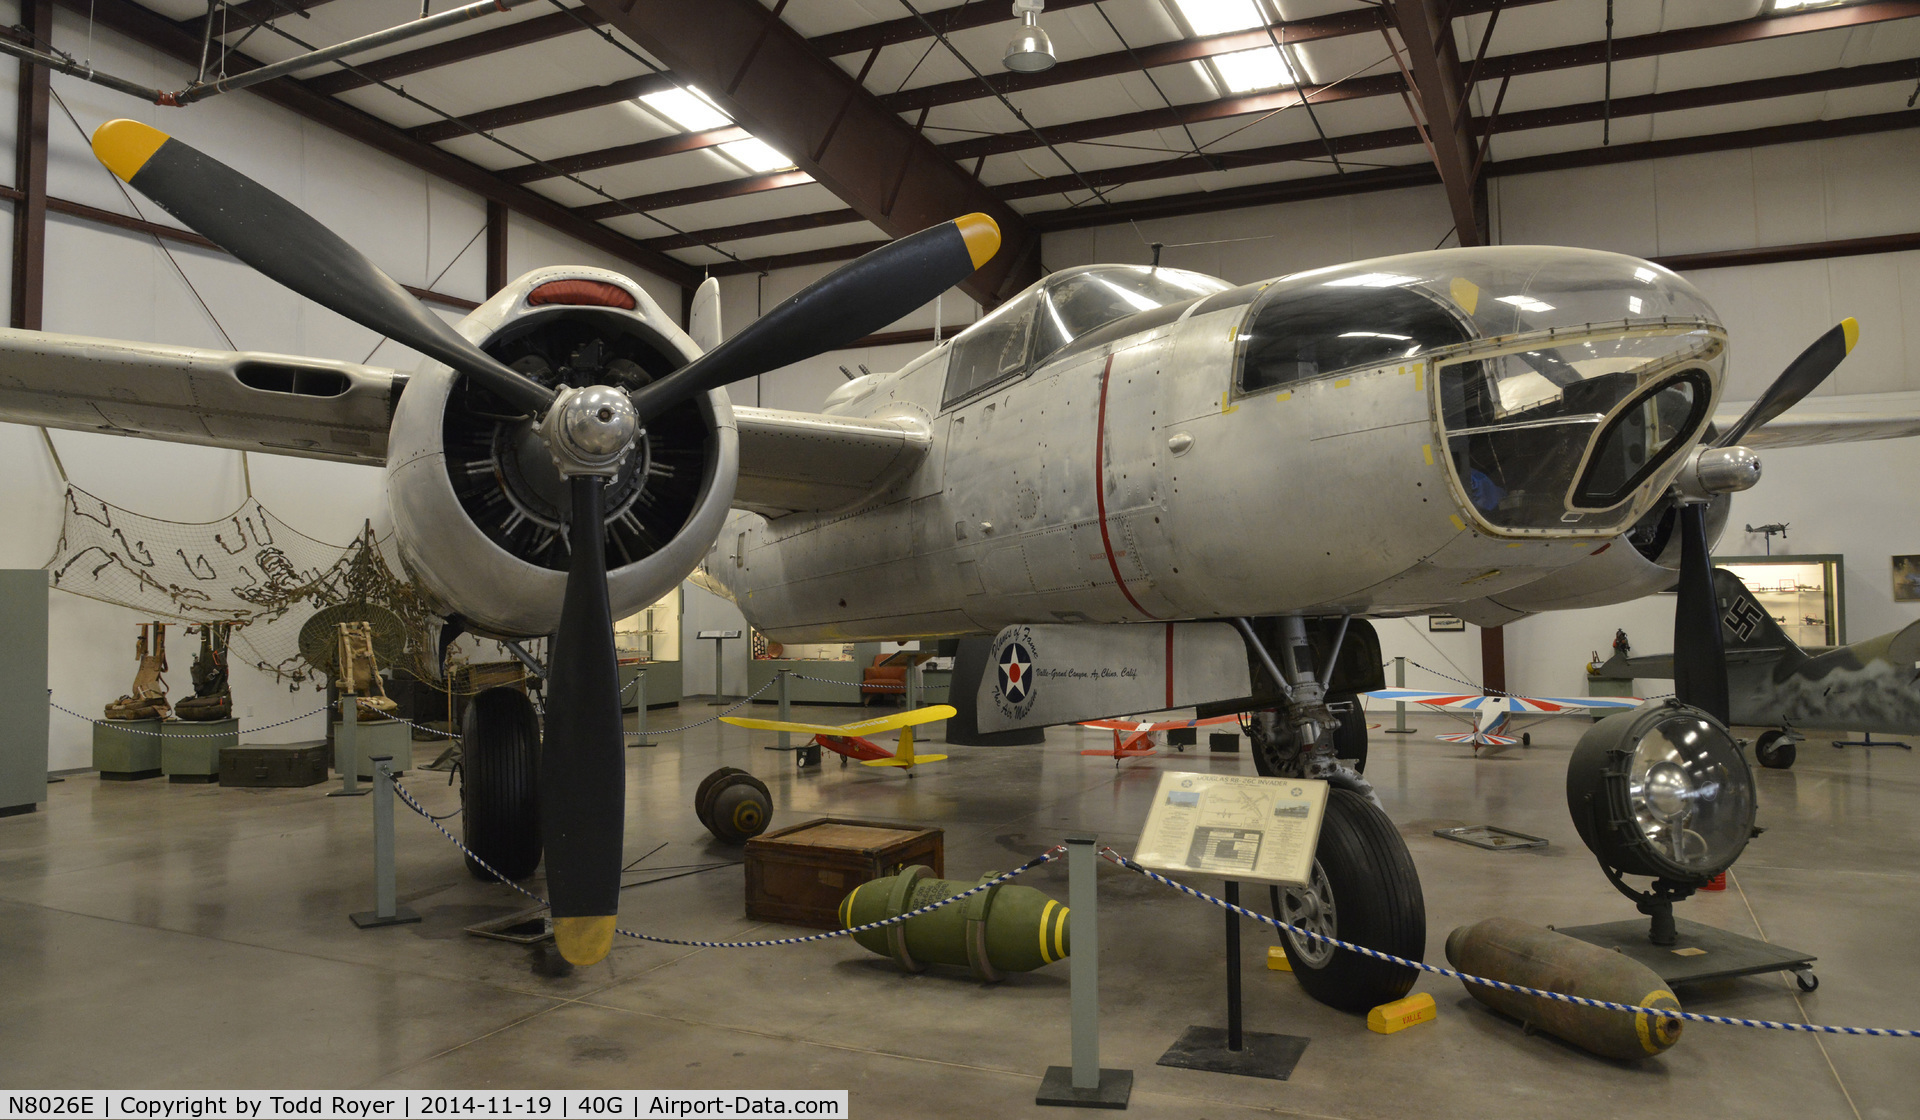 N8026E, 1944 Douglas RB-26C Invader C/N 28602, On display at the Planes of Fame Valle location